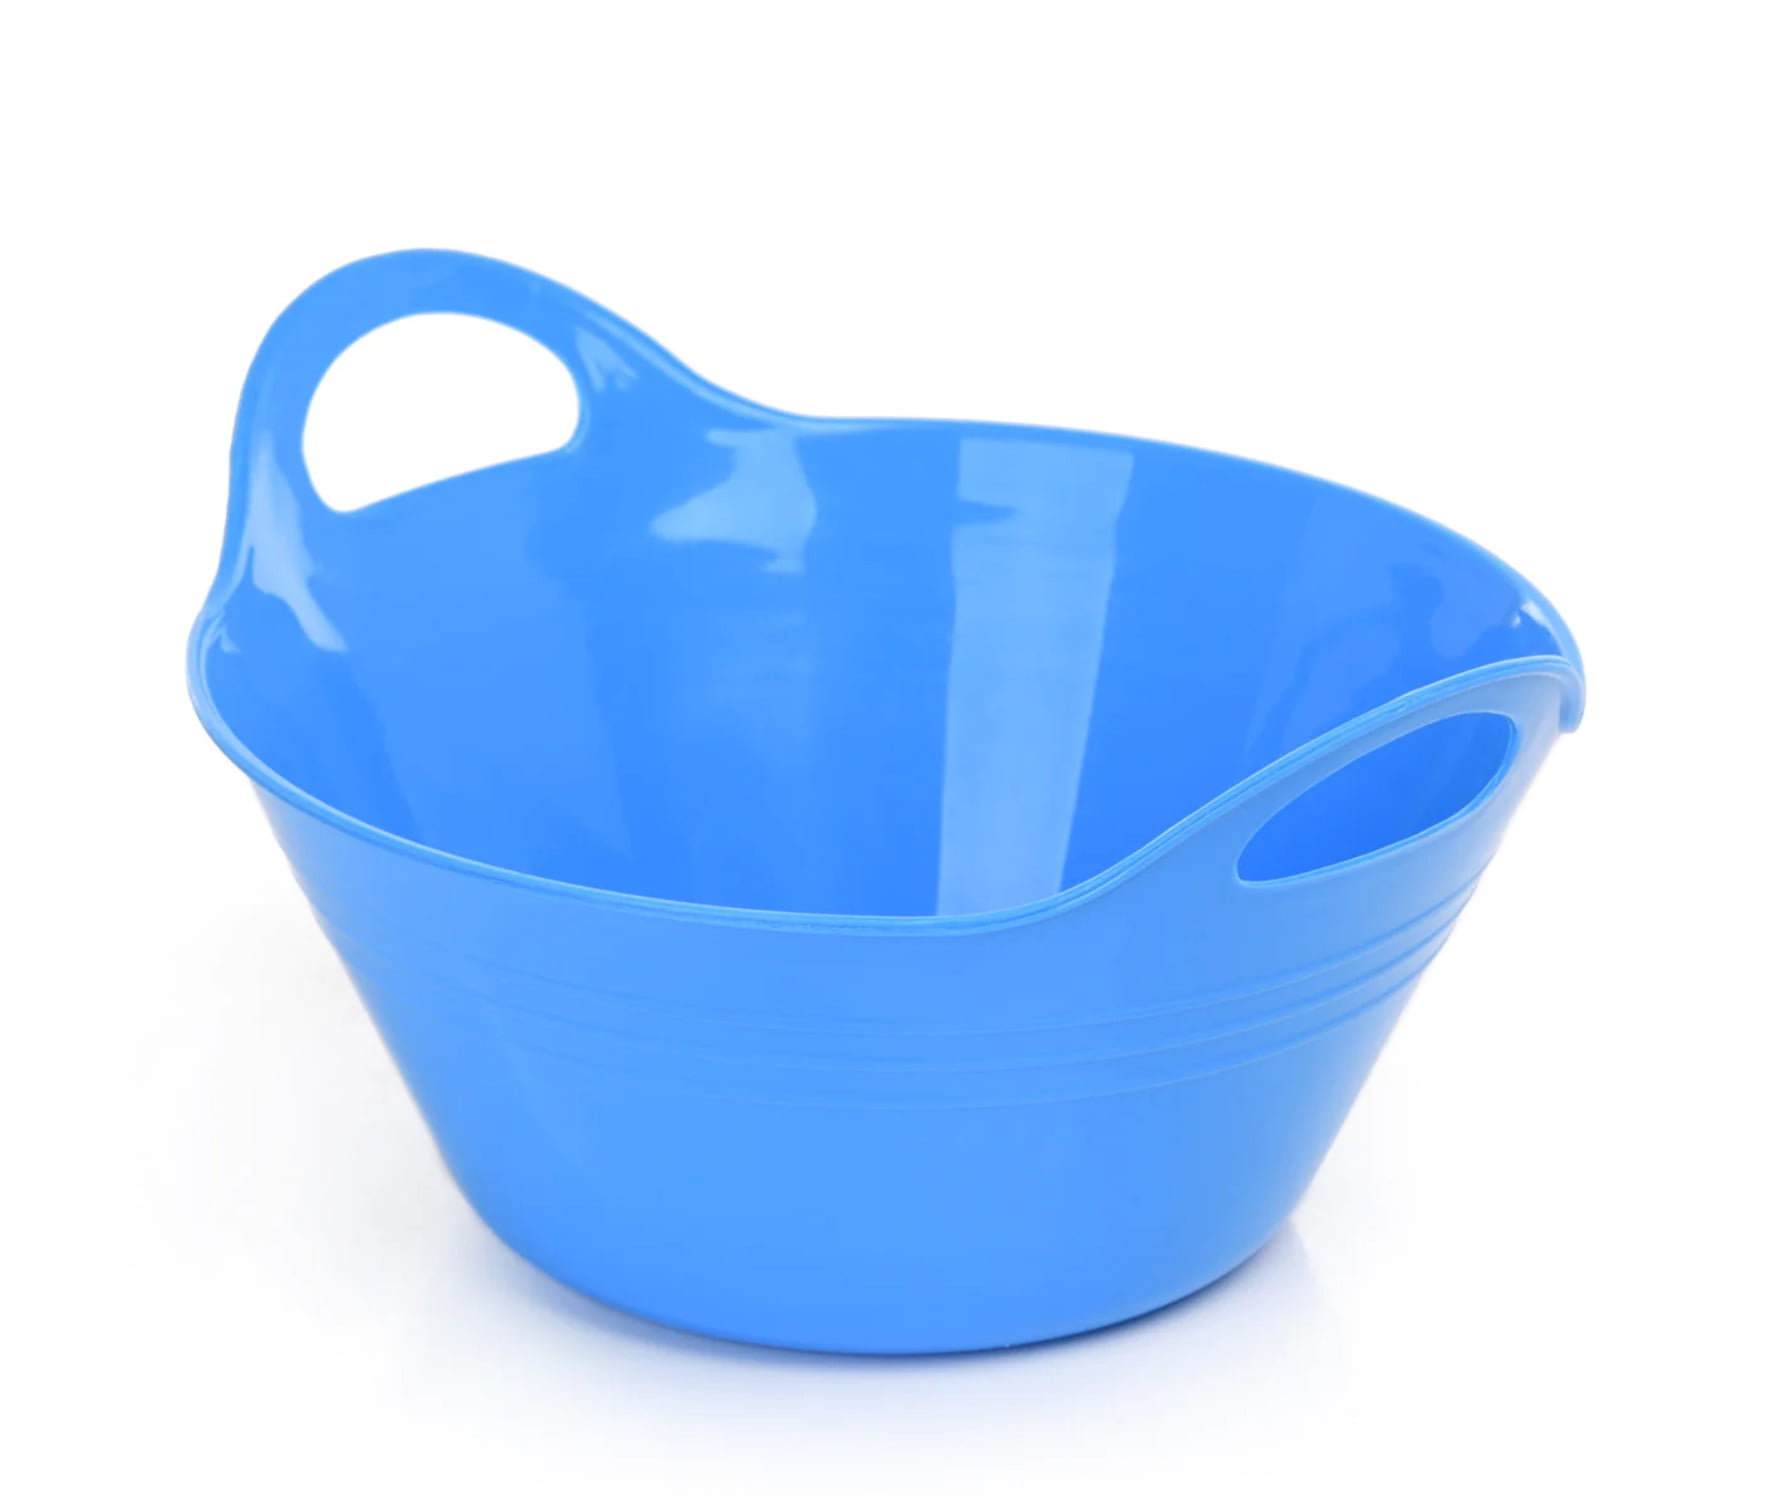  Solo Plastic Bowl 20 oz/22 ct Mixed Red & Blue (Pack